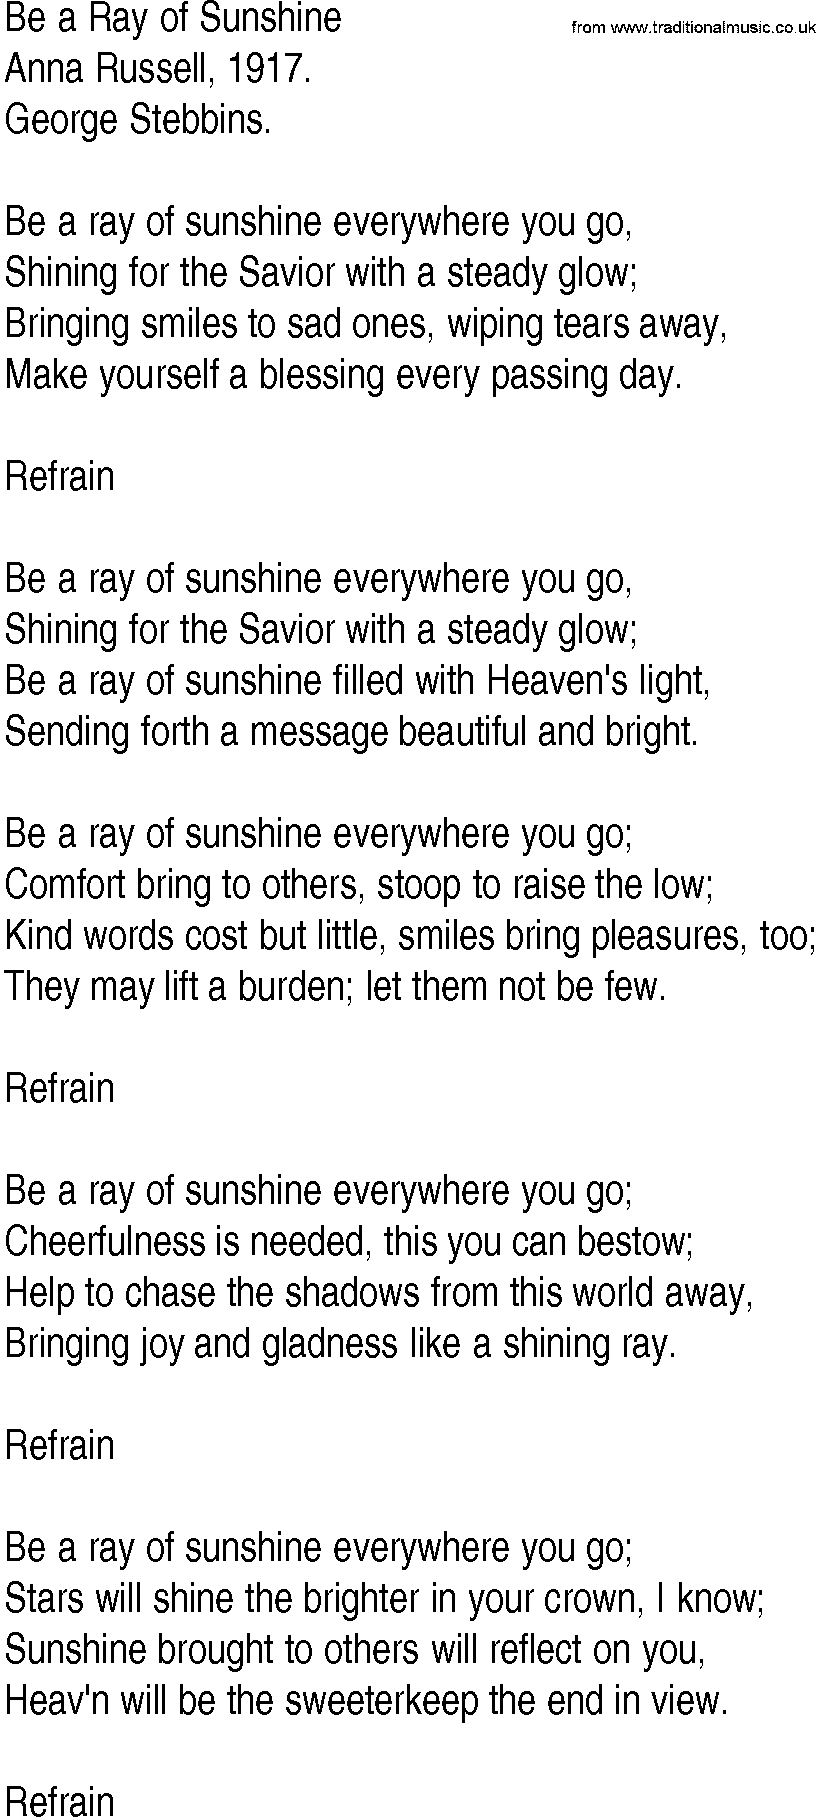 Hymn and Gospel Song: Be a Ray of Sunshine by Anna Russell lyrics